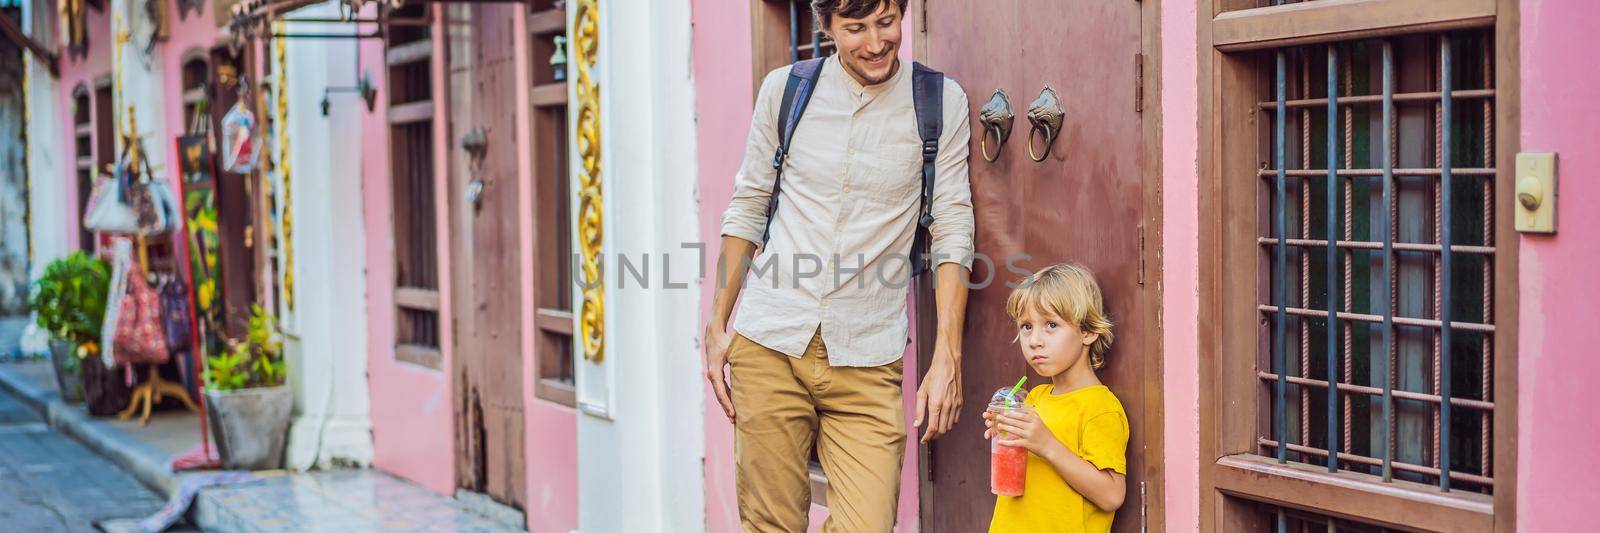 BANNER, LONG FORMAT Dad and son tourists on the Street in the Portugese style Romani in Phuket Town. Also called Chinatown or the old town. Traveling with kids concept.